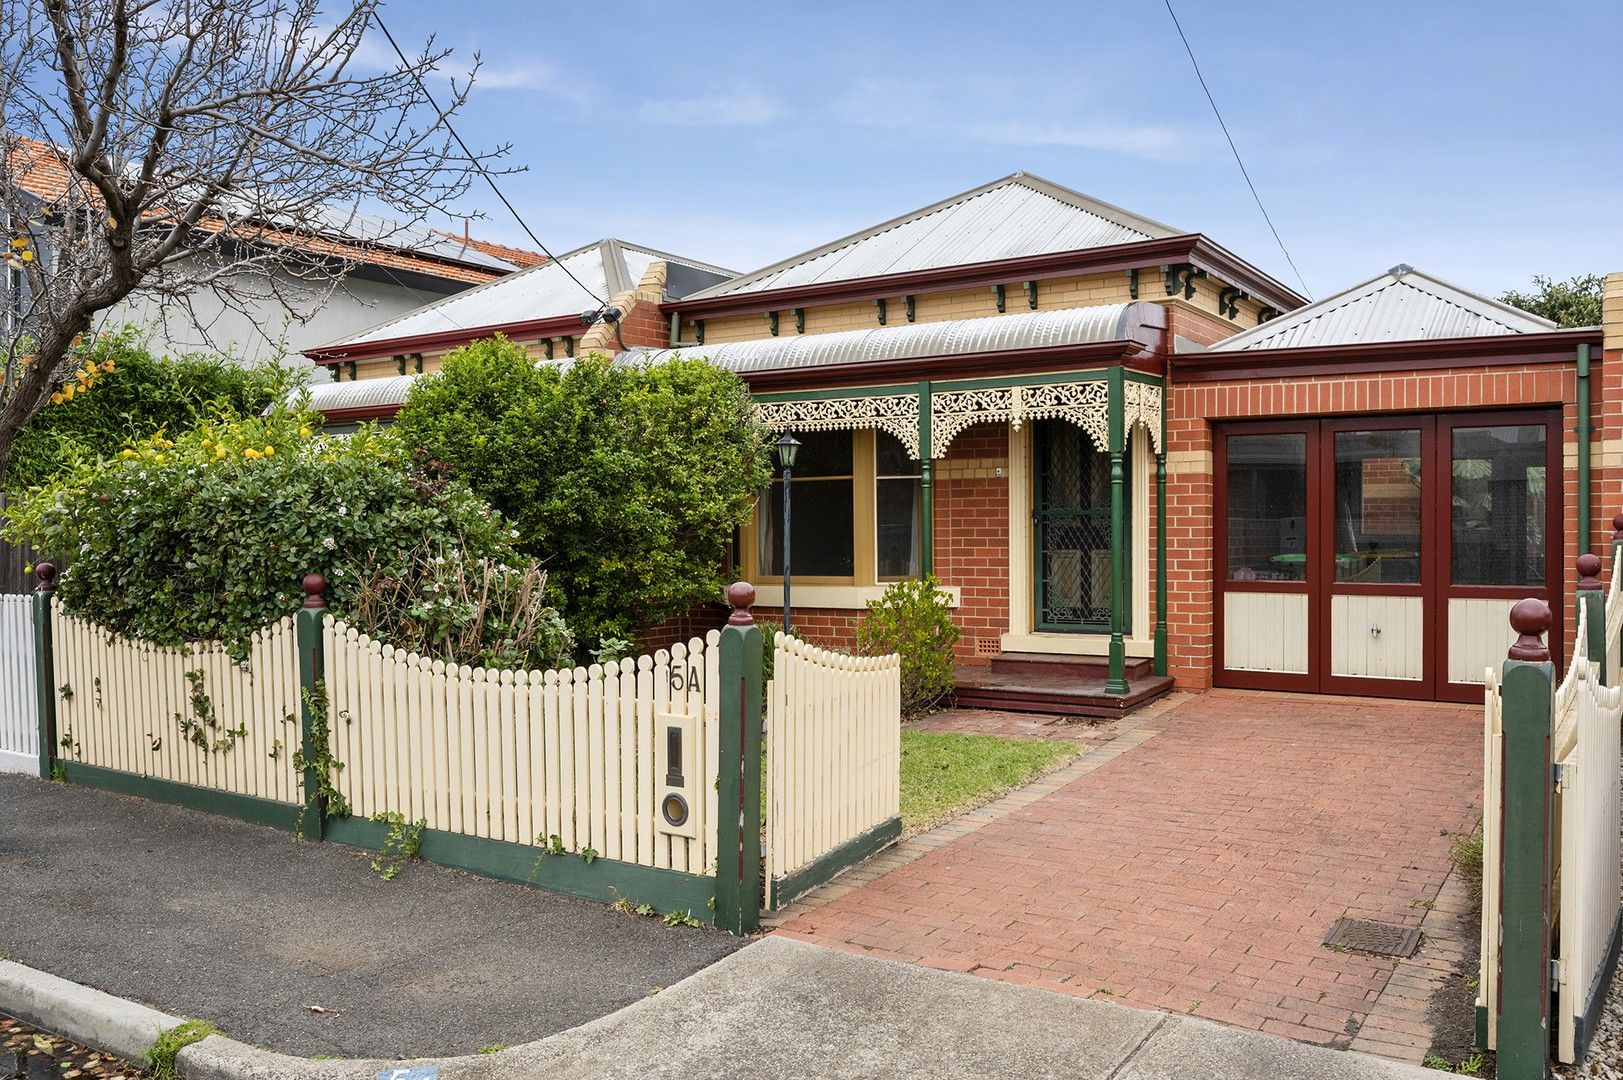 2 bedrooms House in 5a Dalgarno Street WILLIAMSTOWN VIC, 3016